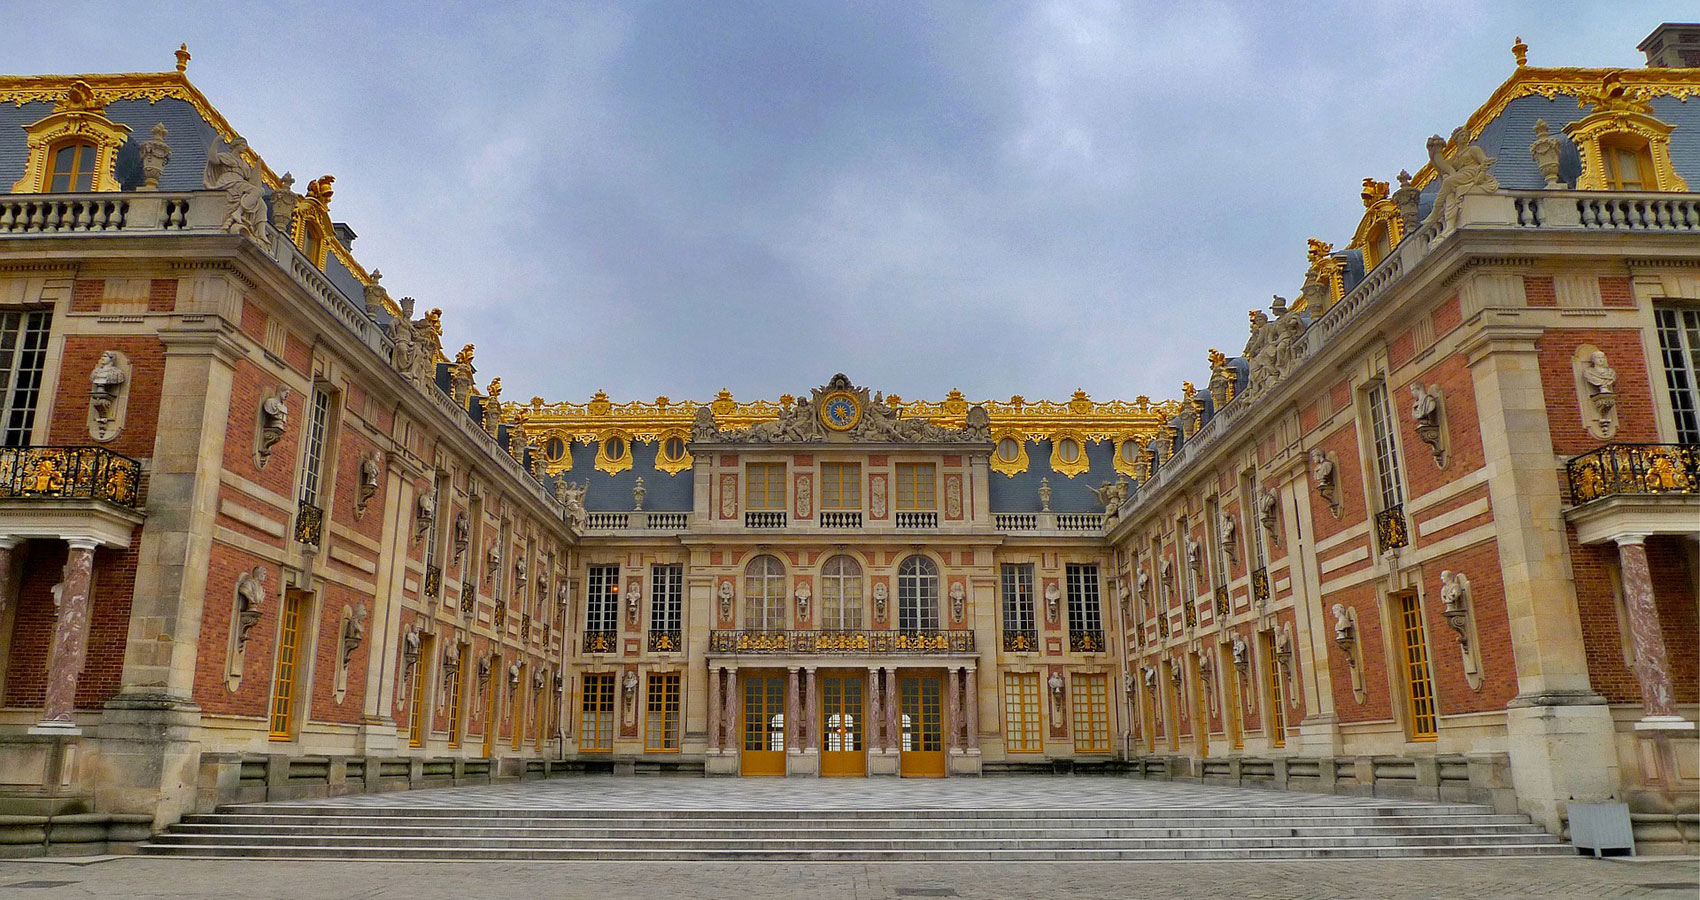 Versailles, a poem written by Rich at Spillwords.com